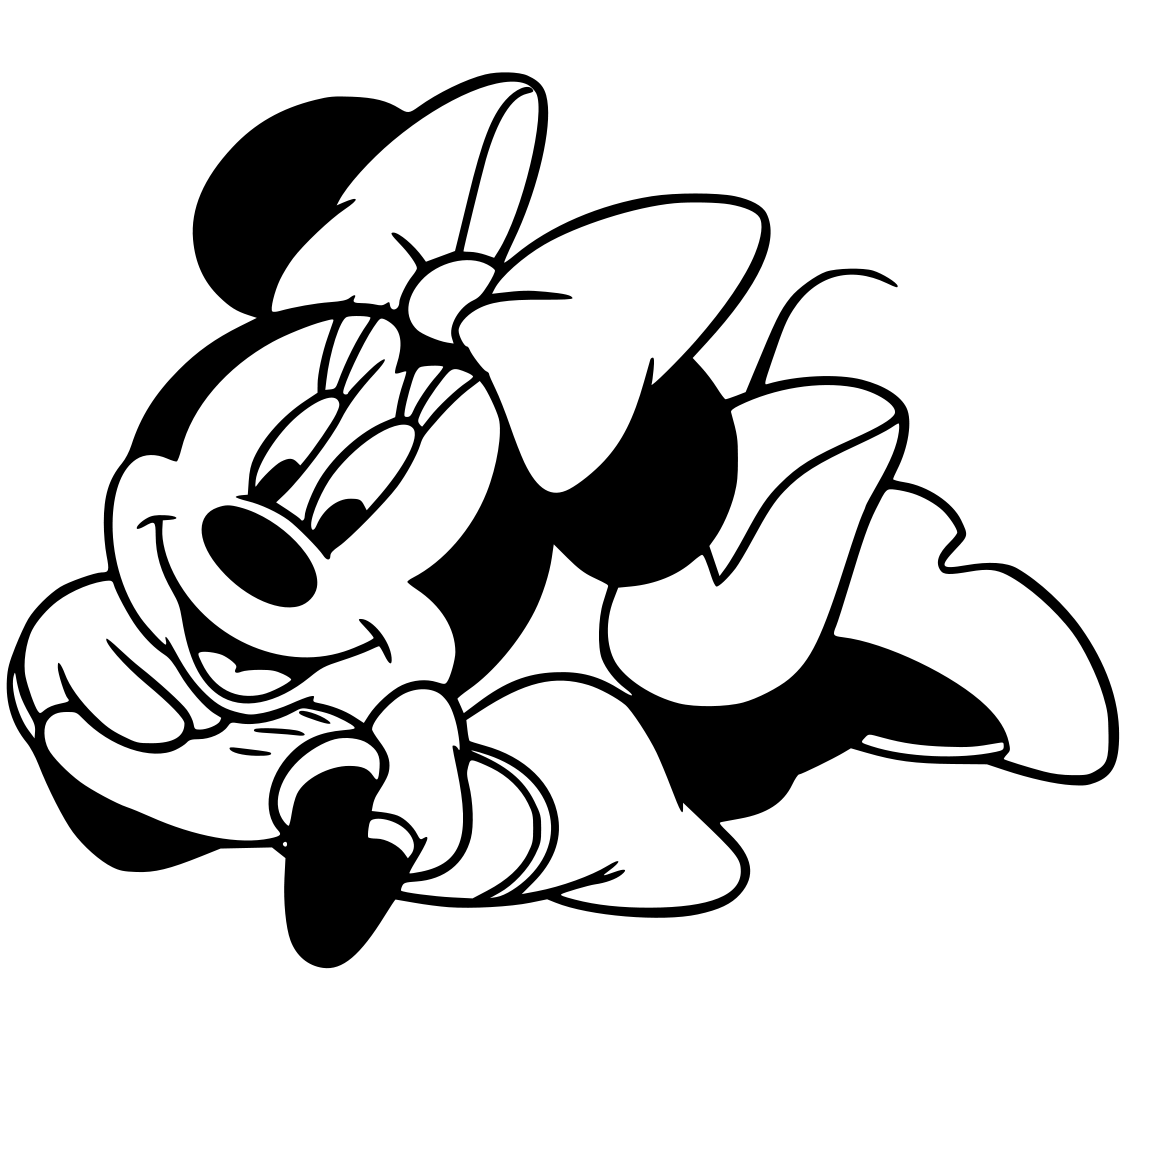 Coloring to print : Famous characters - Walt Disney - Mickey Mouse ...